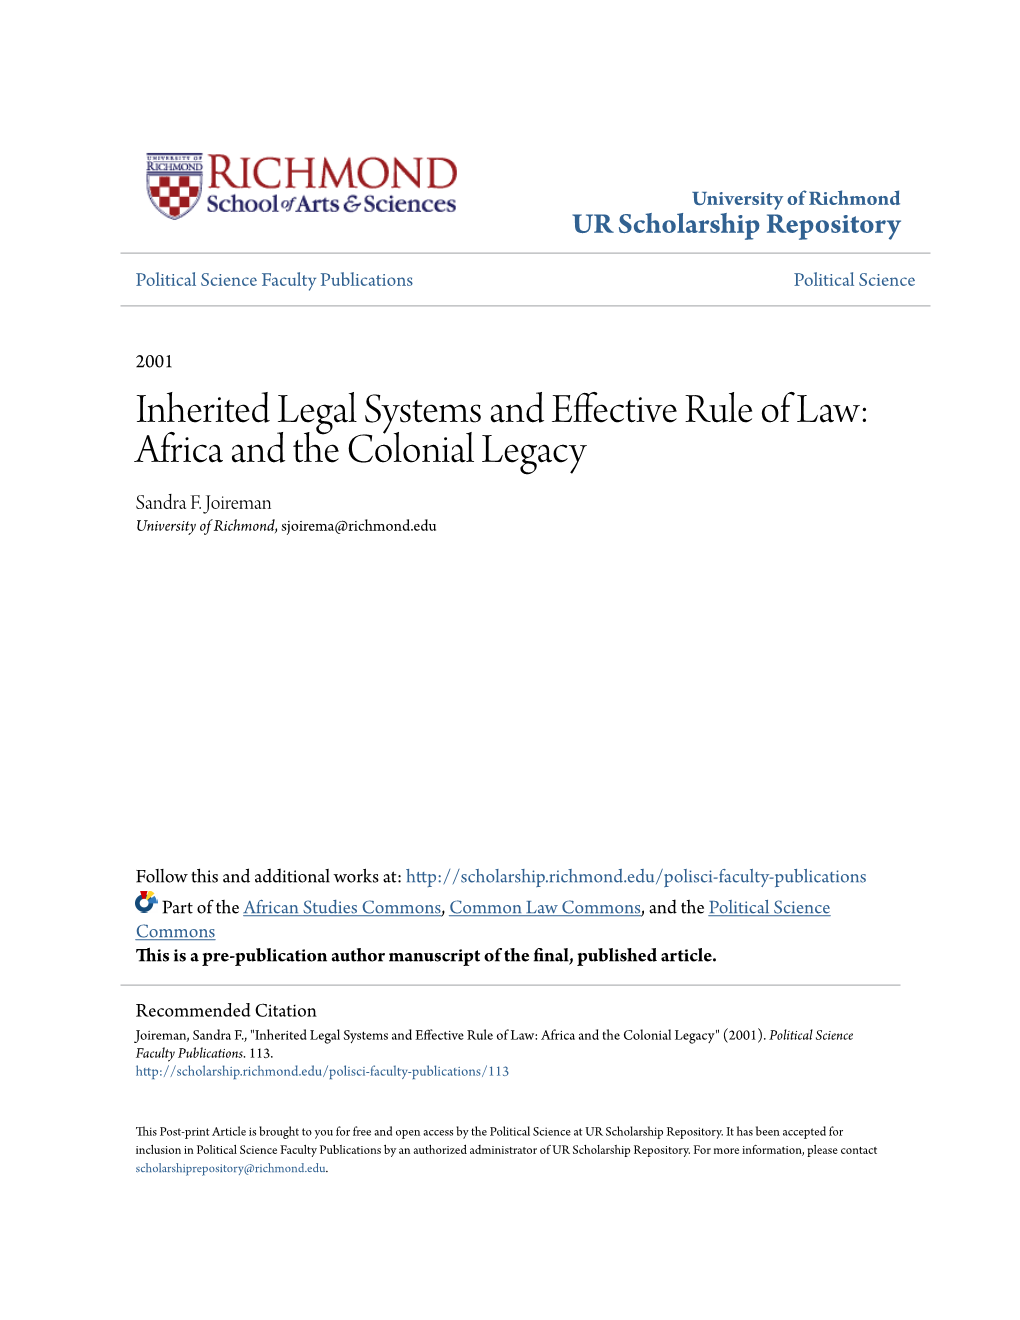 Inherited Legal Systems and Effective Rule of Law: Africa and the Colonial Legacy Sandra F